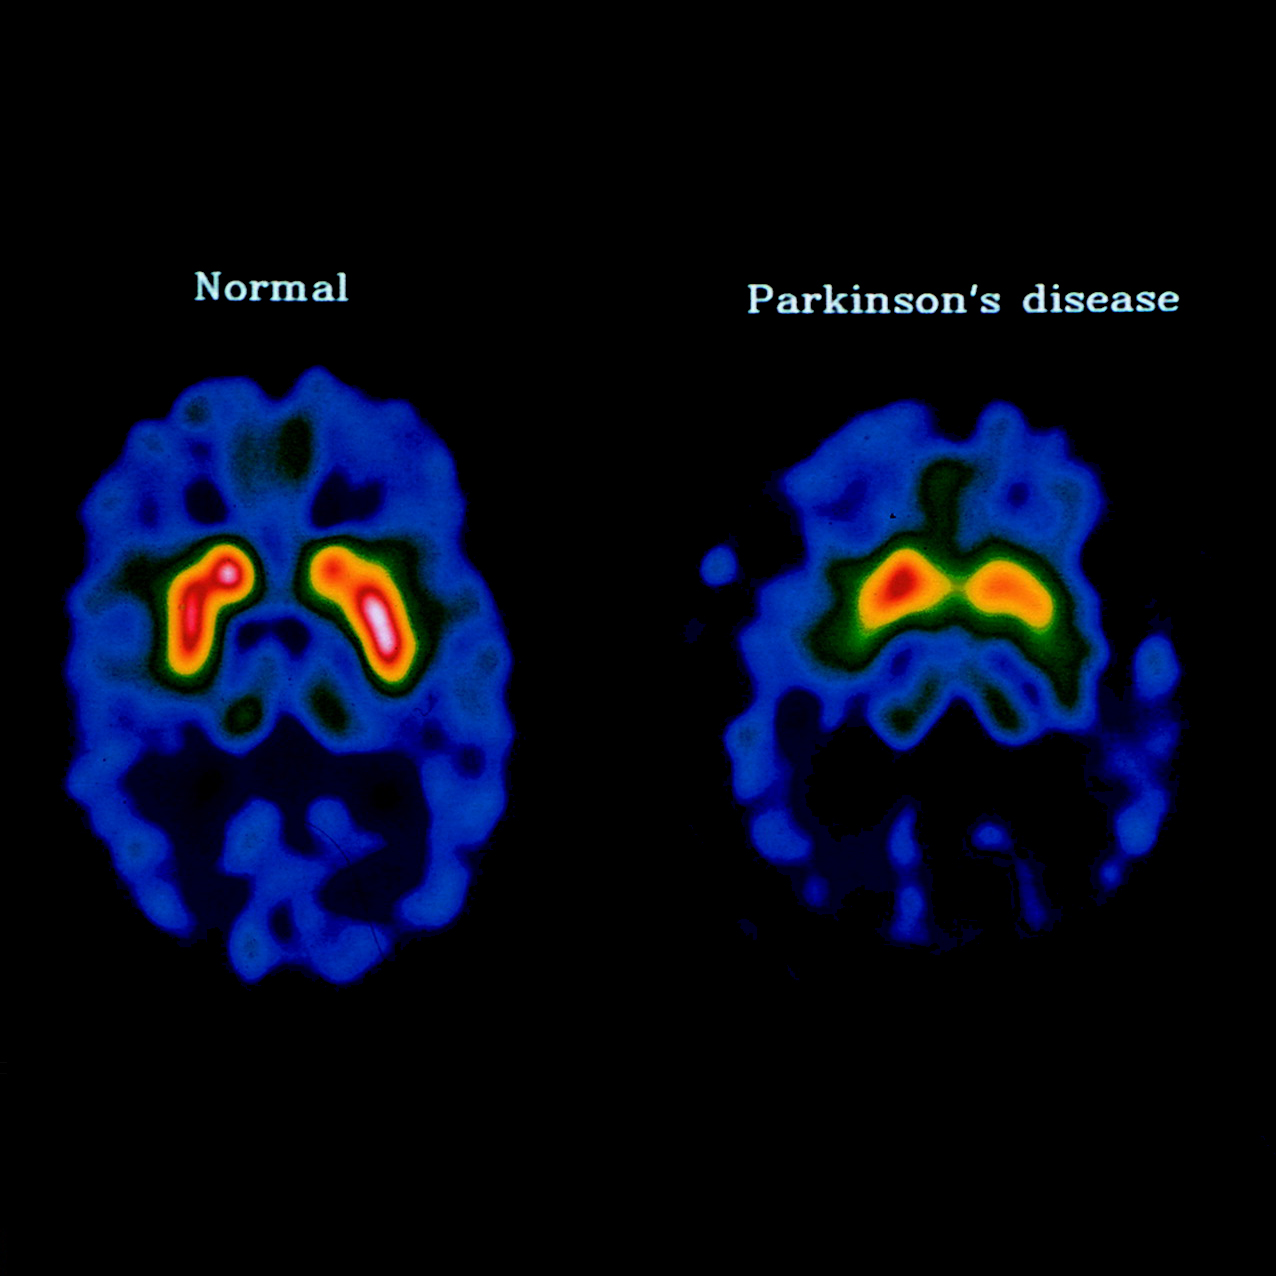 Research computing team aids investigating Parkinson's